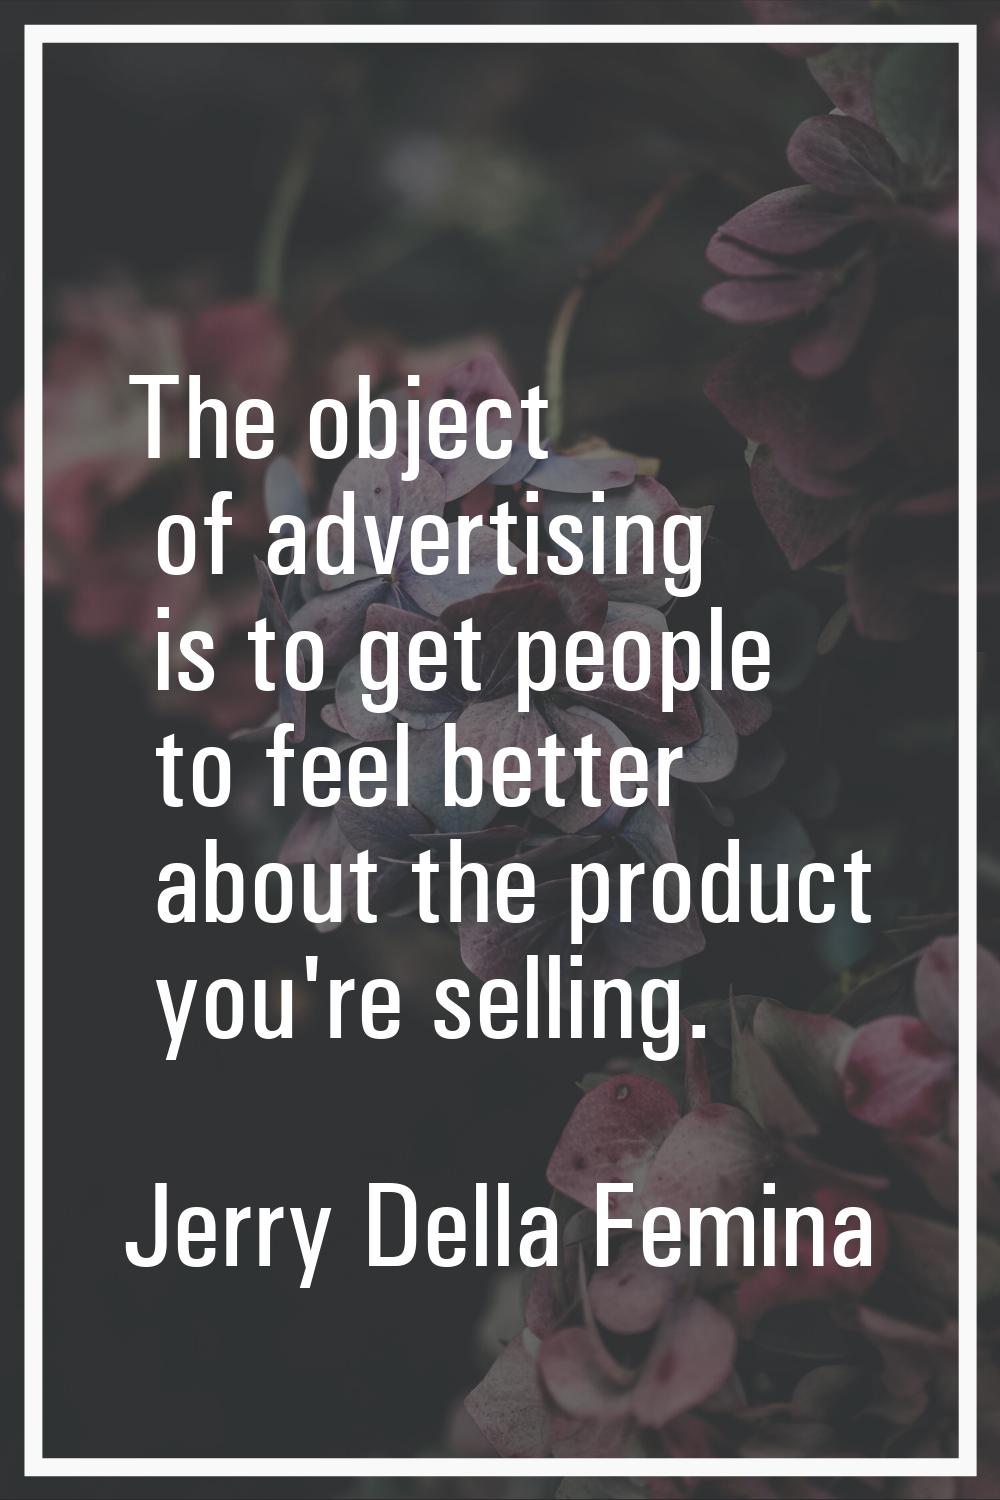 The object of advertising is to get people to feel better about the product you're selling.